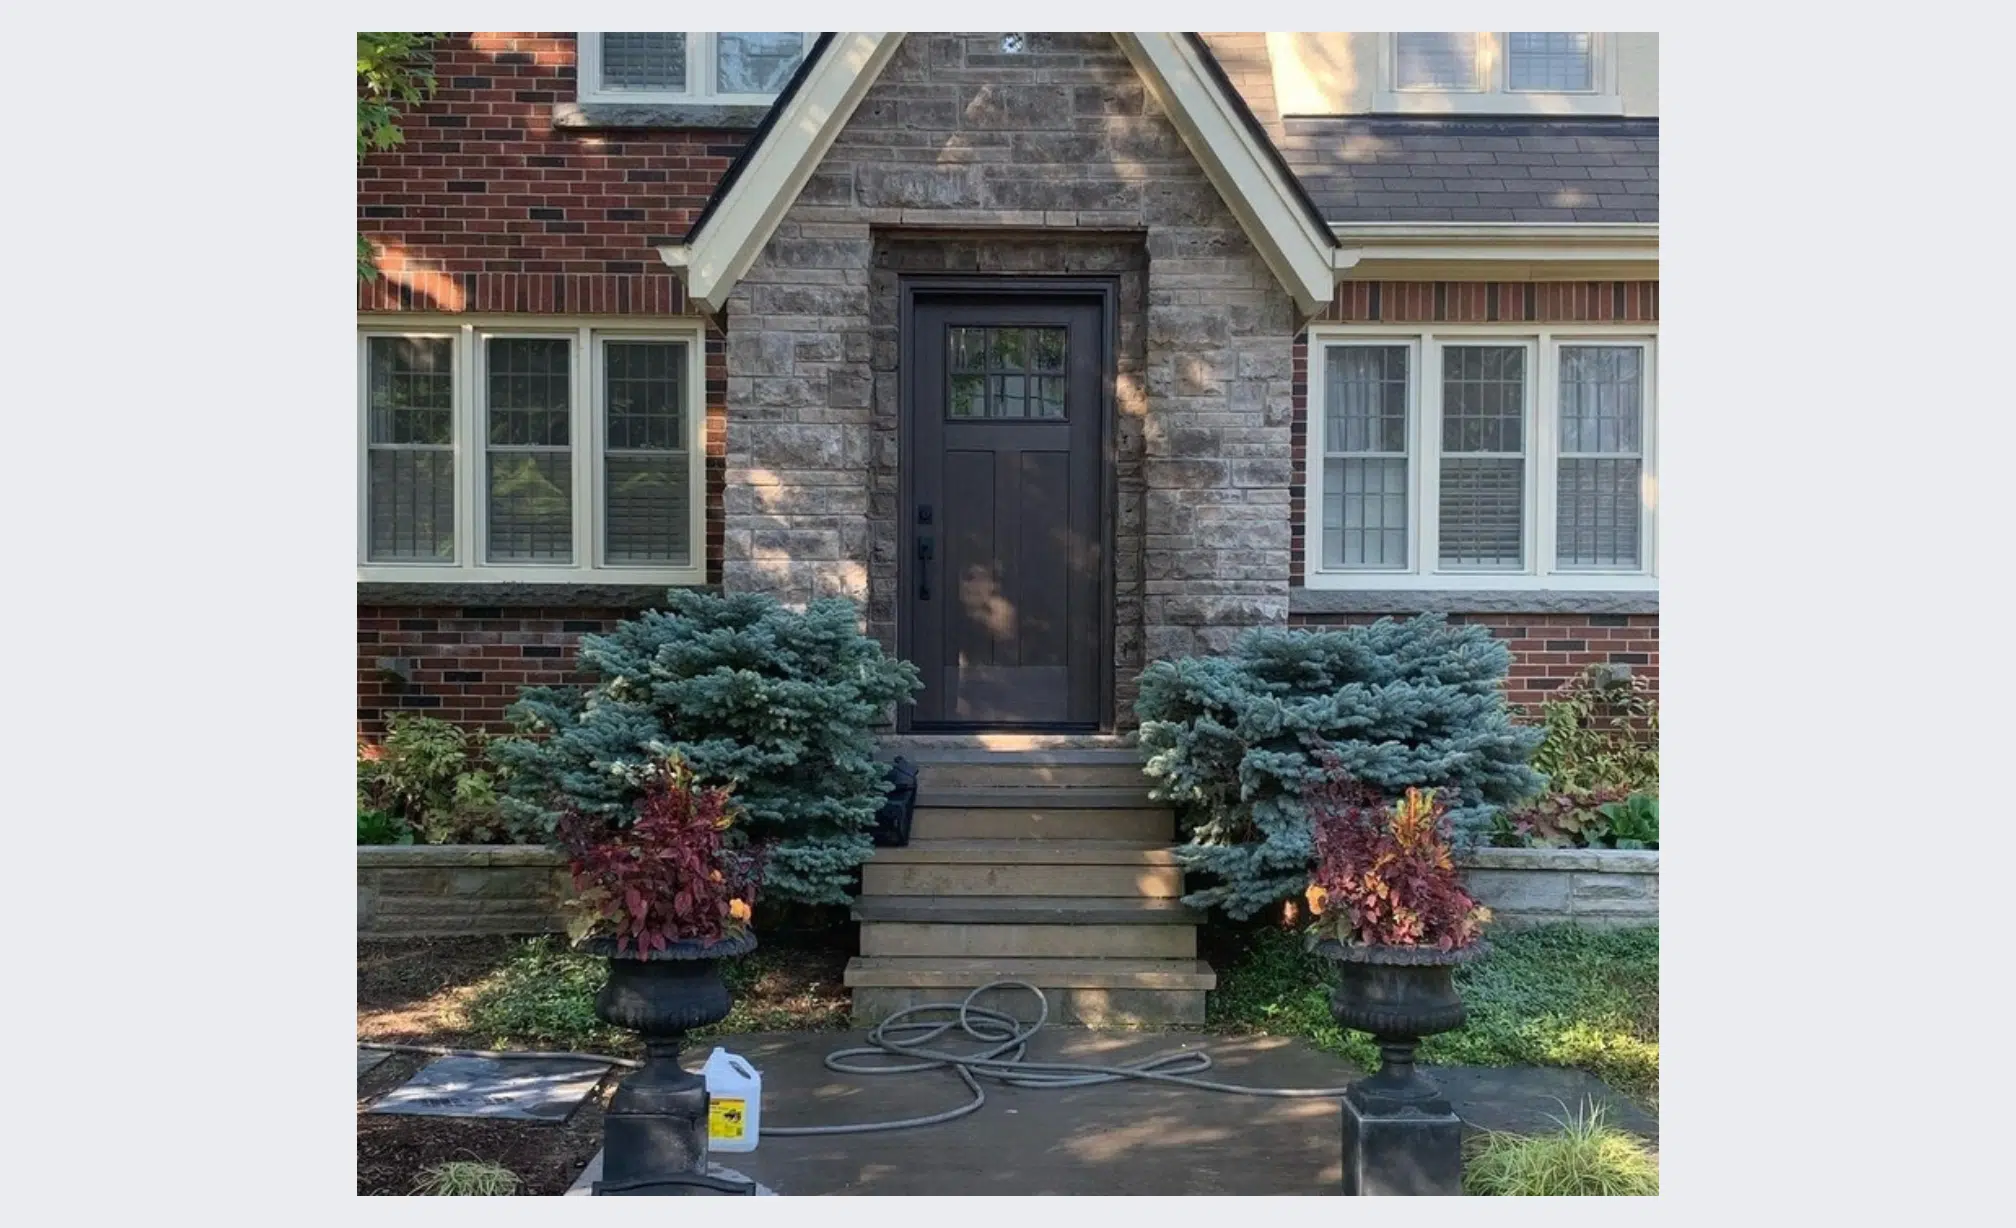 This image shows the front entrance of a residential home The home has a brick and stone exterior with a prominent black wooden front door framed by stone On either side of the front steps are large planters filled with lush blue-green evergreen shrubs The landscaping around the entrance includes additional plants and flowers creating a welcoming and well-maintained appearance The image also shows some tools and equipment on the front steps suggesting some ongoing work or maintenance being performed on the property